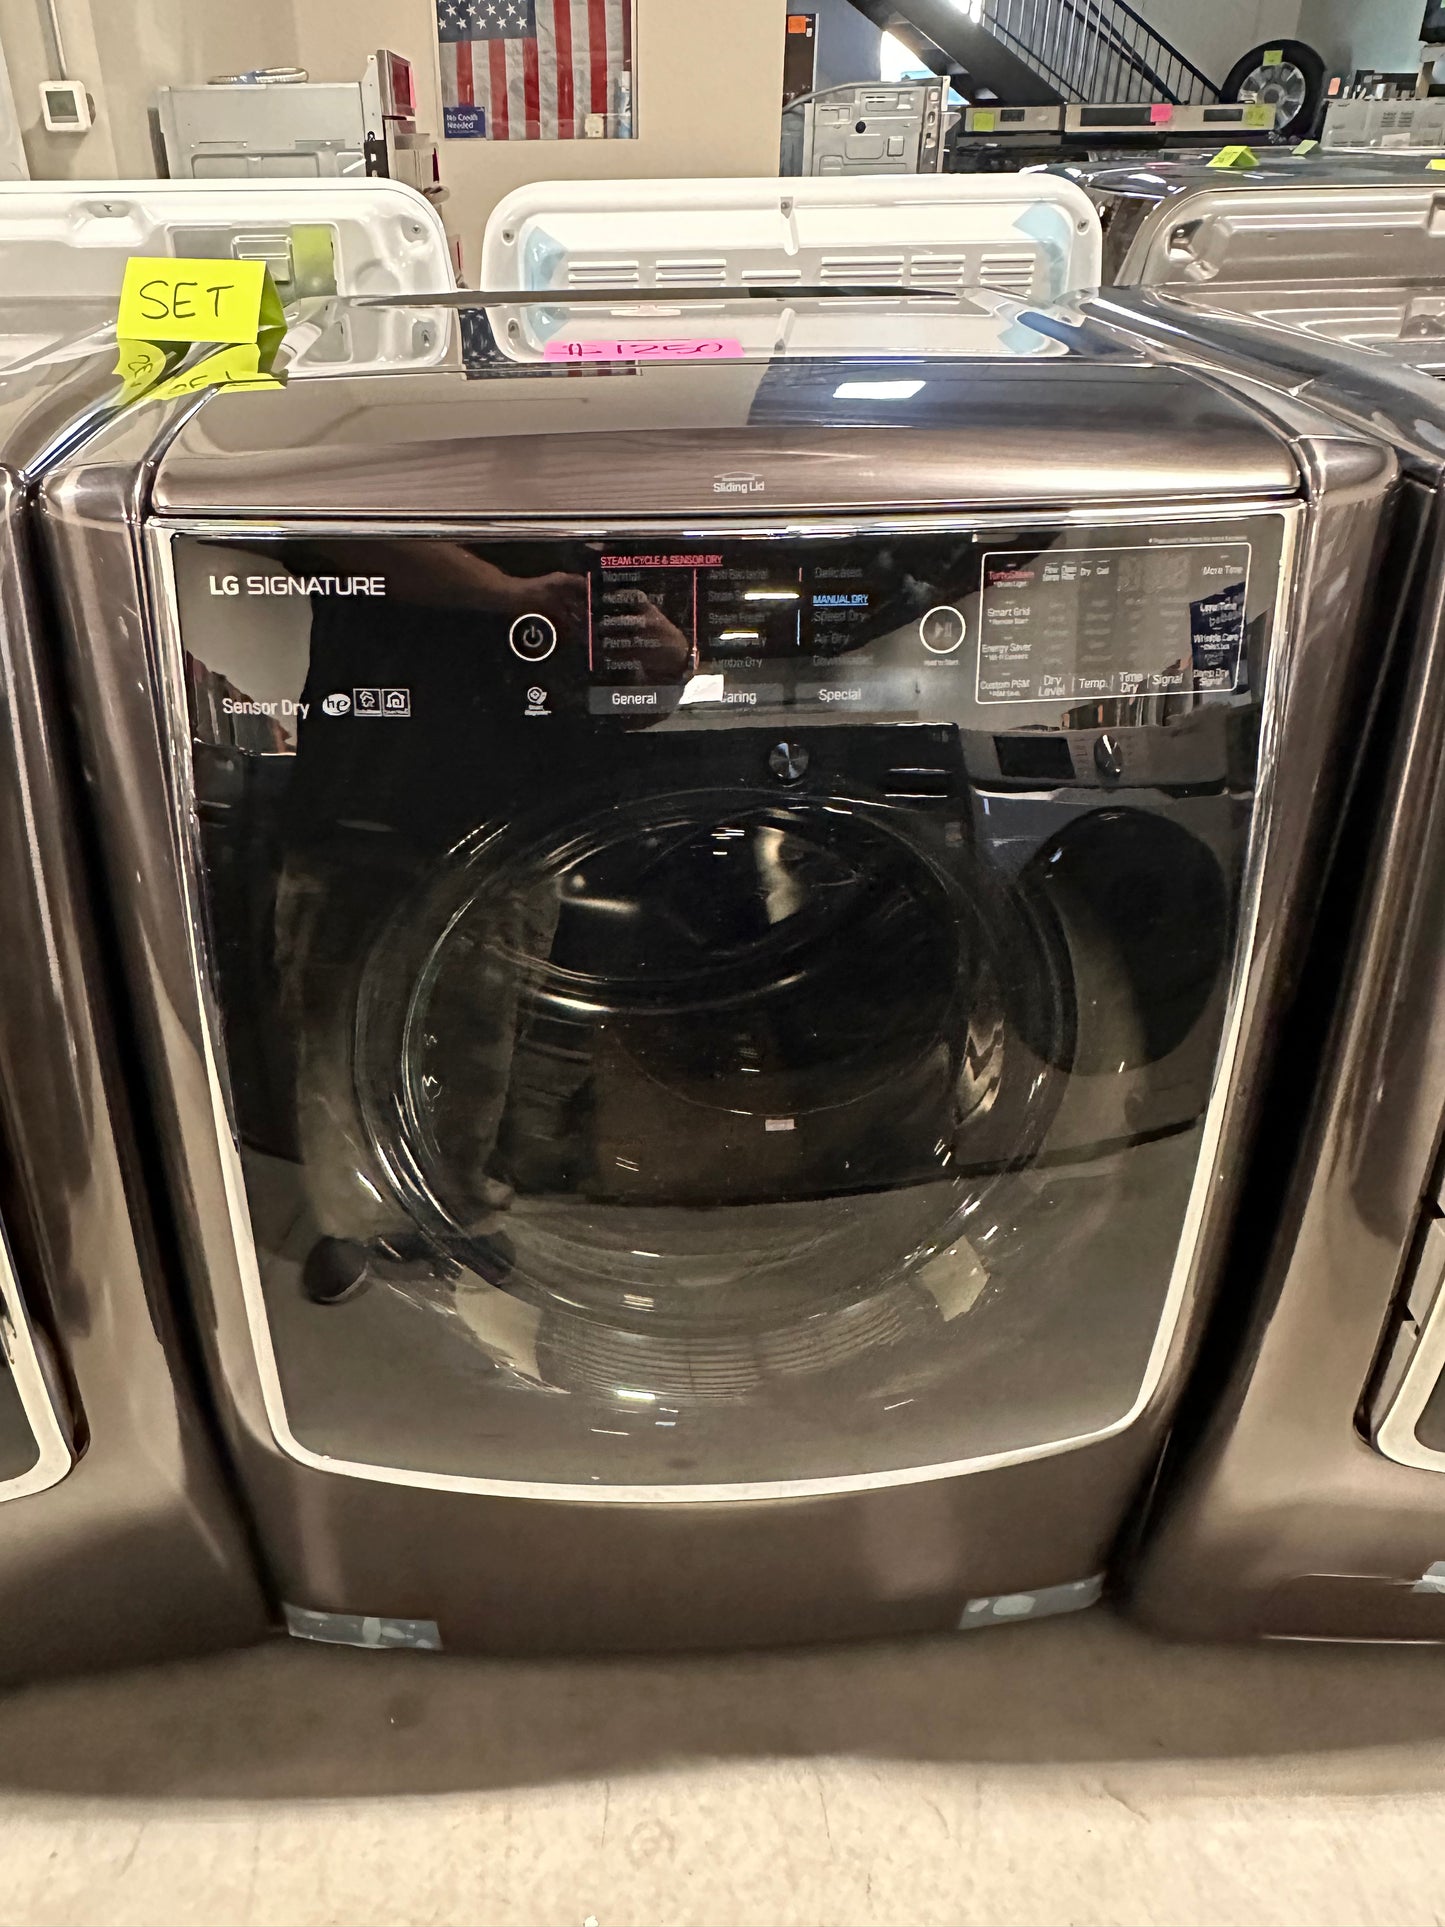 NEW LG SIGNATURE SMART ELECTRIC DRYER with STEAM - DRY12154